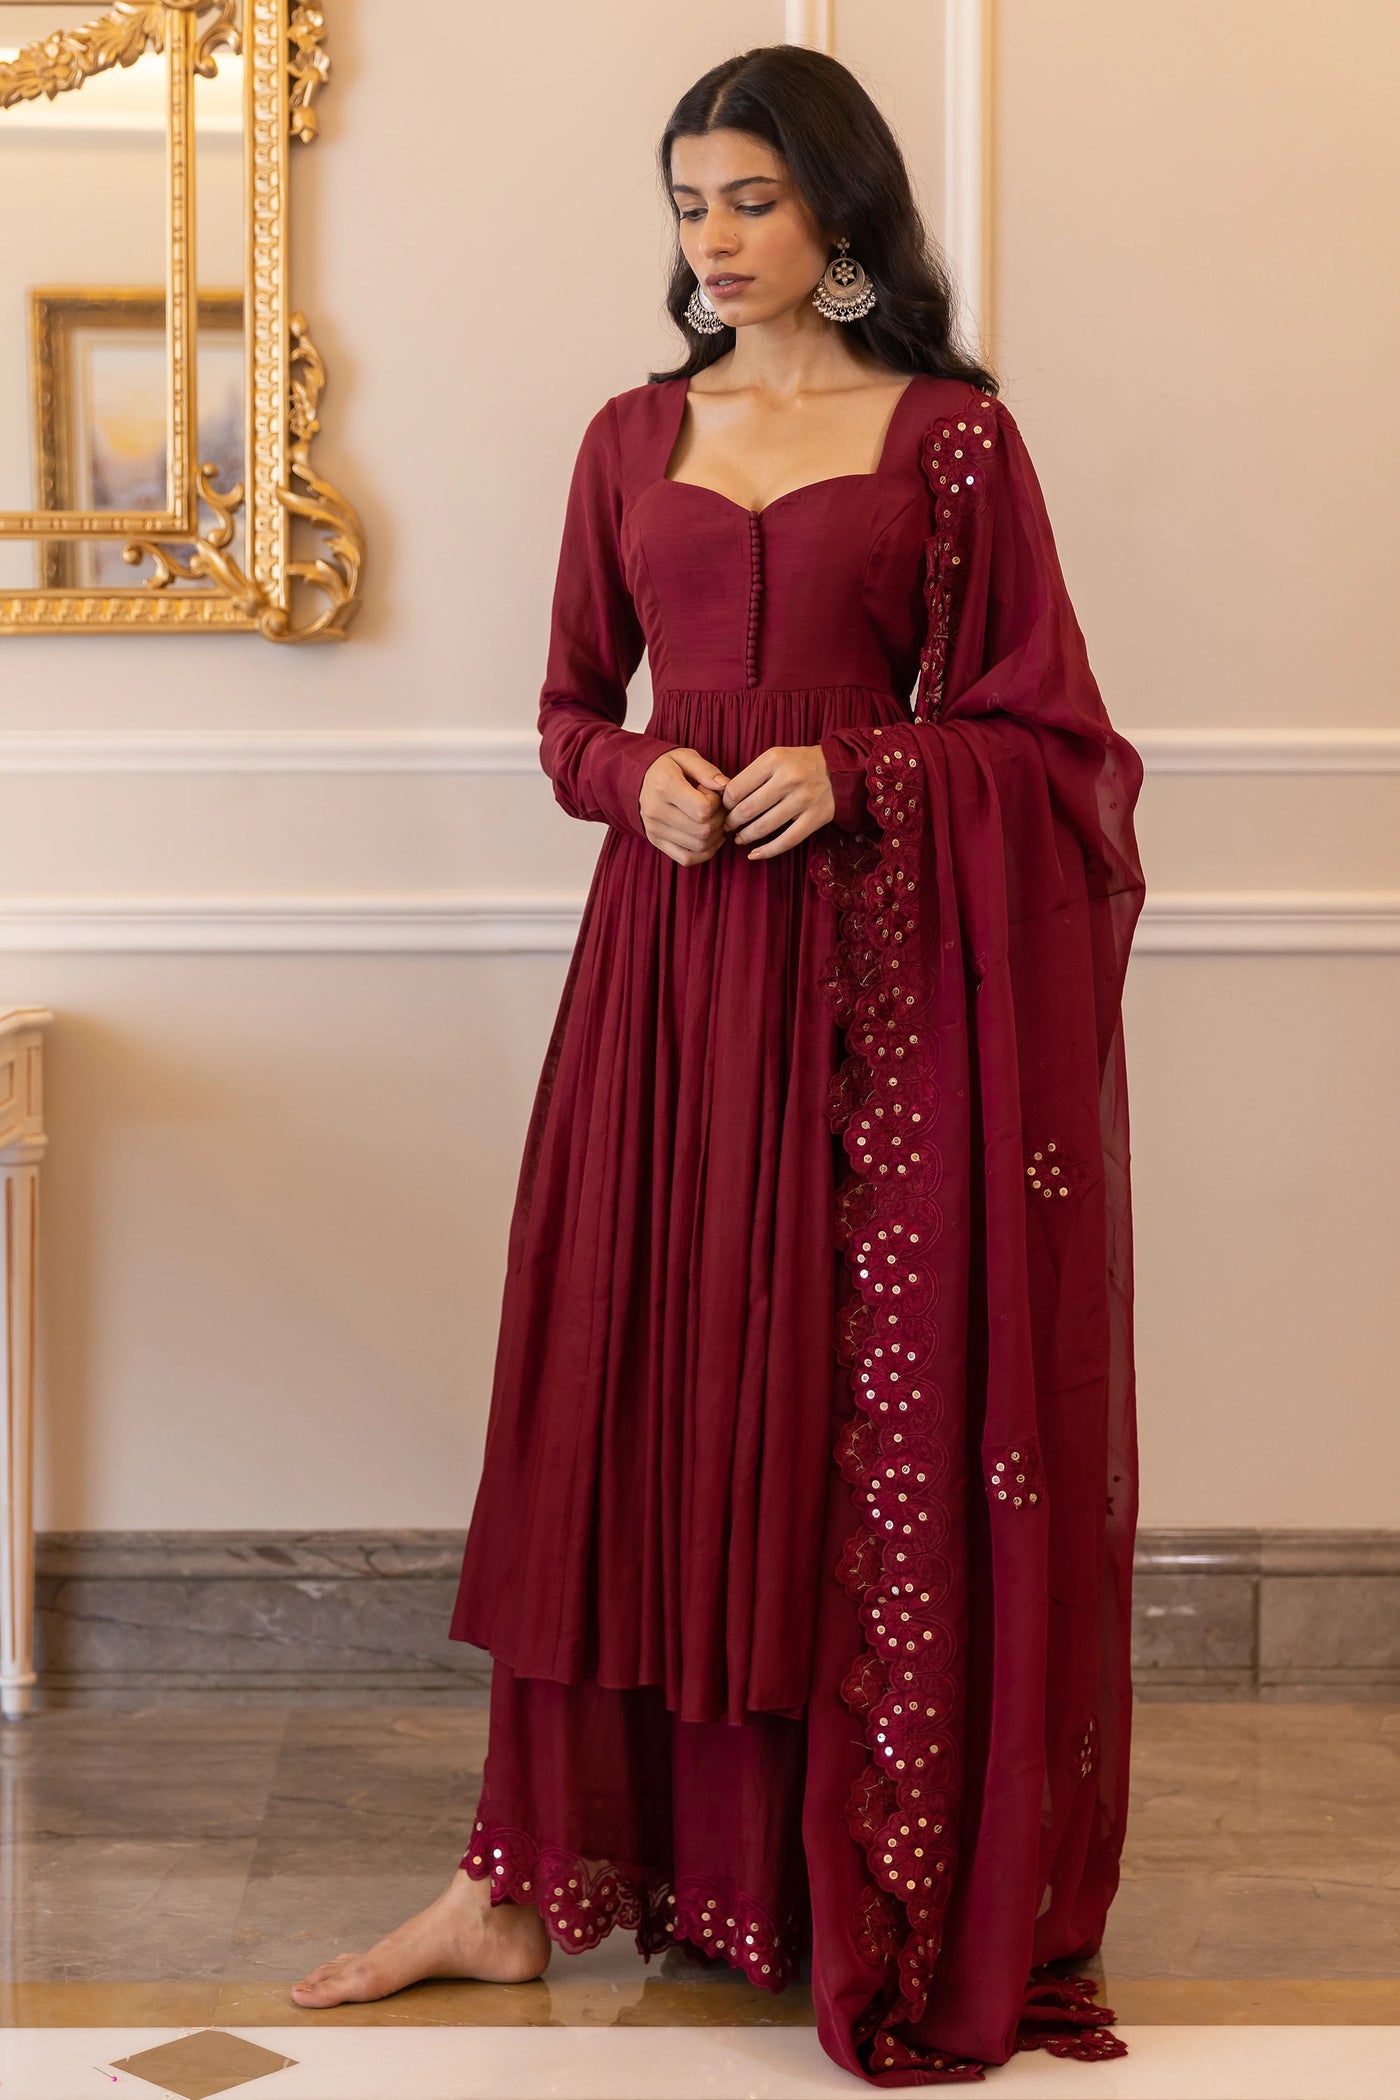 Wine Cotton Silk Anarkali Set Indian Clothing in Denver, CO, Aurora, CO, Boulder, CO, Fort Collins, CO, Colorado Springs, CO, Parker, CO, Highlands Ranch, CO, Cherry Creek, CO, Centennial, CO, and Longmont, CO. NATIONWIDE SHIPPING USA- India Fashion X